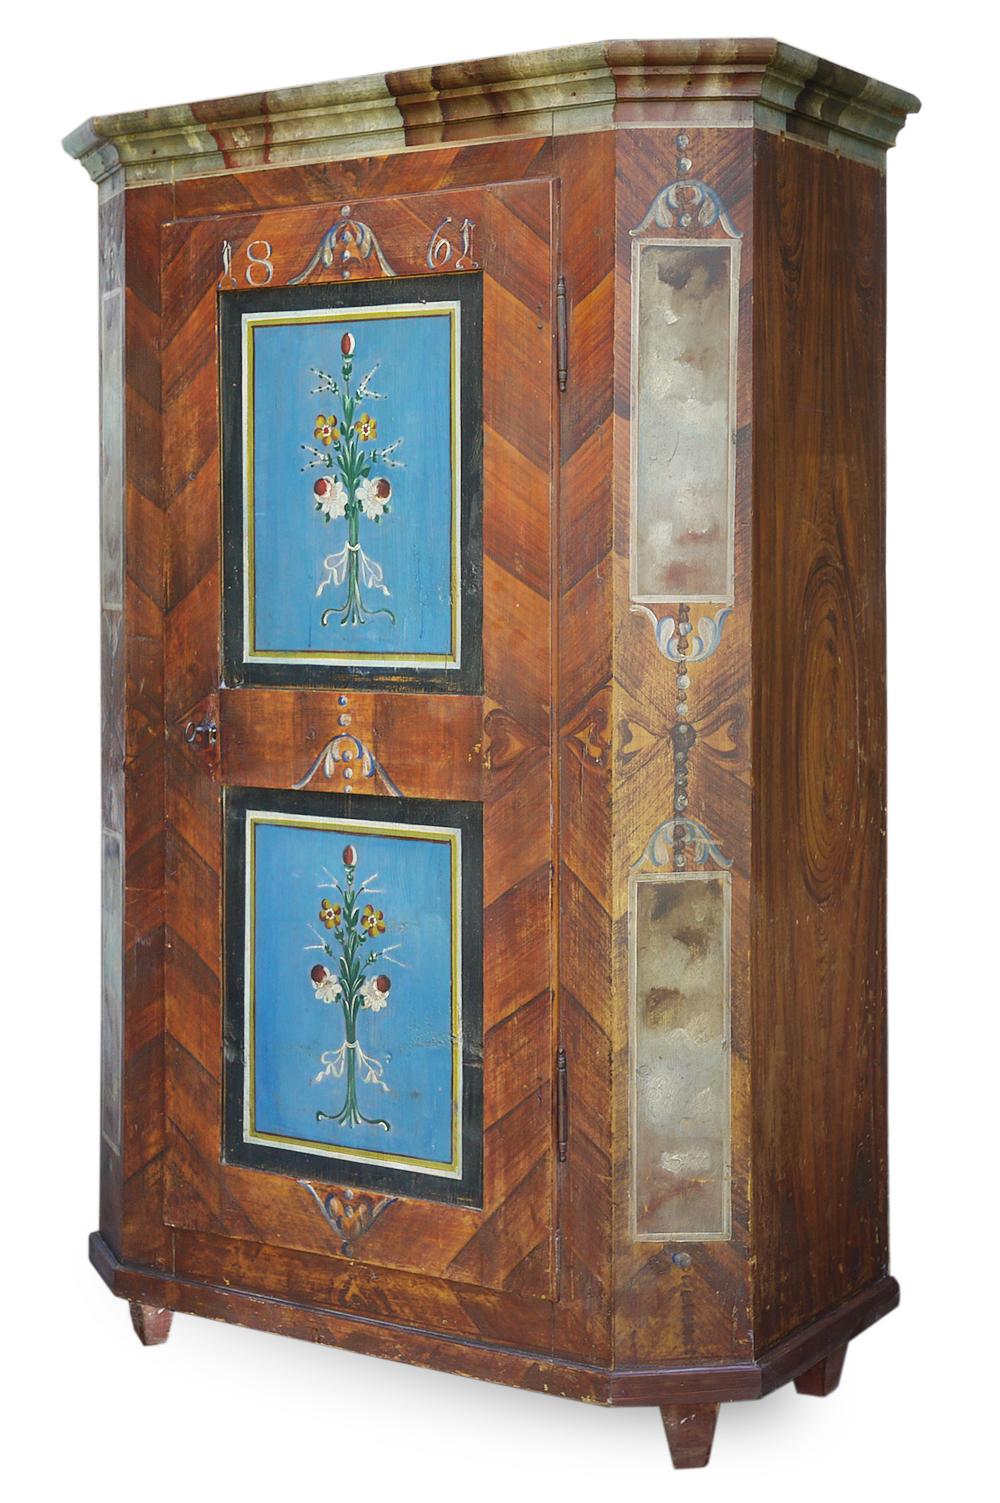 Northern Italy painted wardrobe dated 1861

Measures: H. 164cm - W. 98cm (107 to the frames) - D. 46cm (50 to the frames)

Tyrolean painted wardrobe with one door, in fir wood with imitation wood decorations (herringbone) on the front. Also on